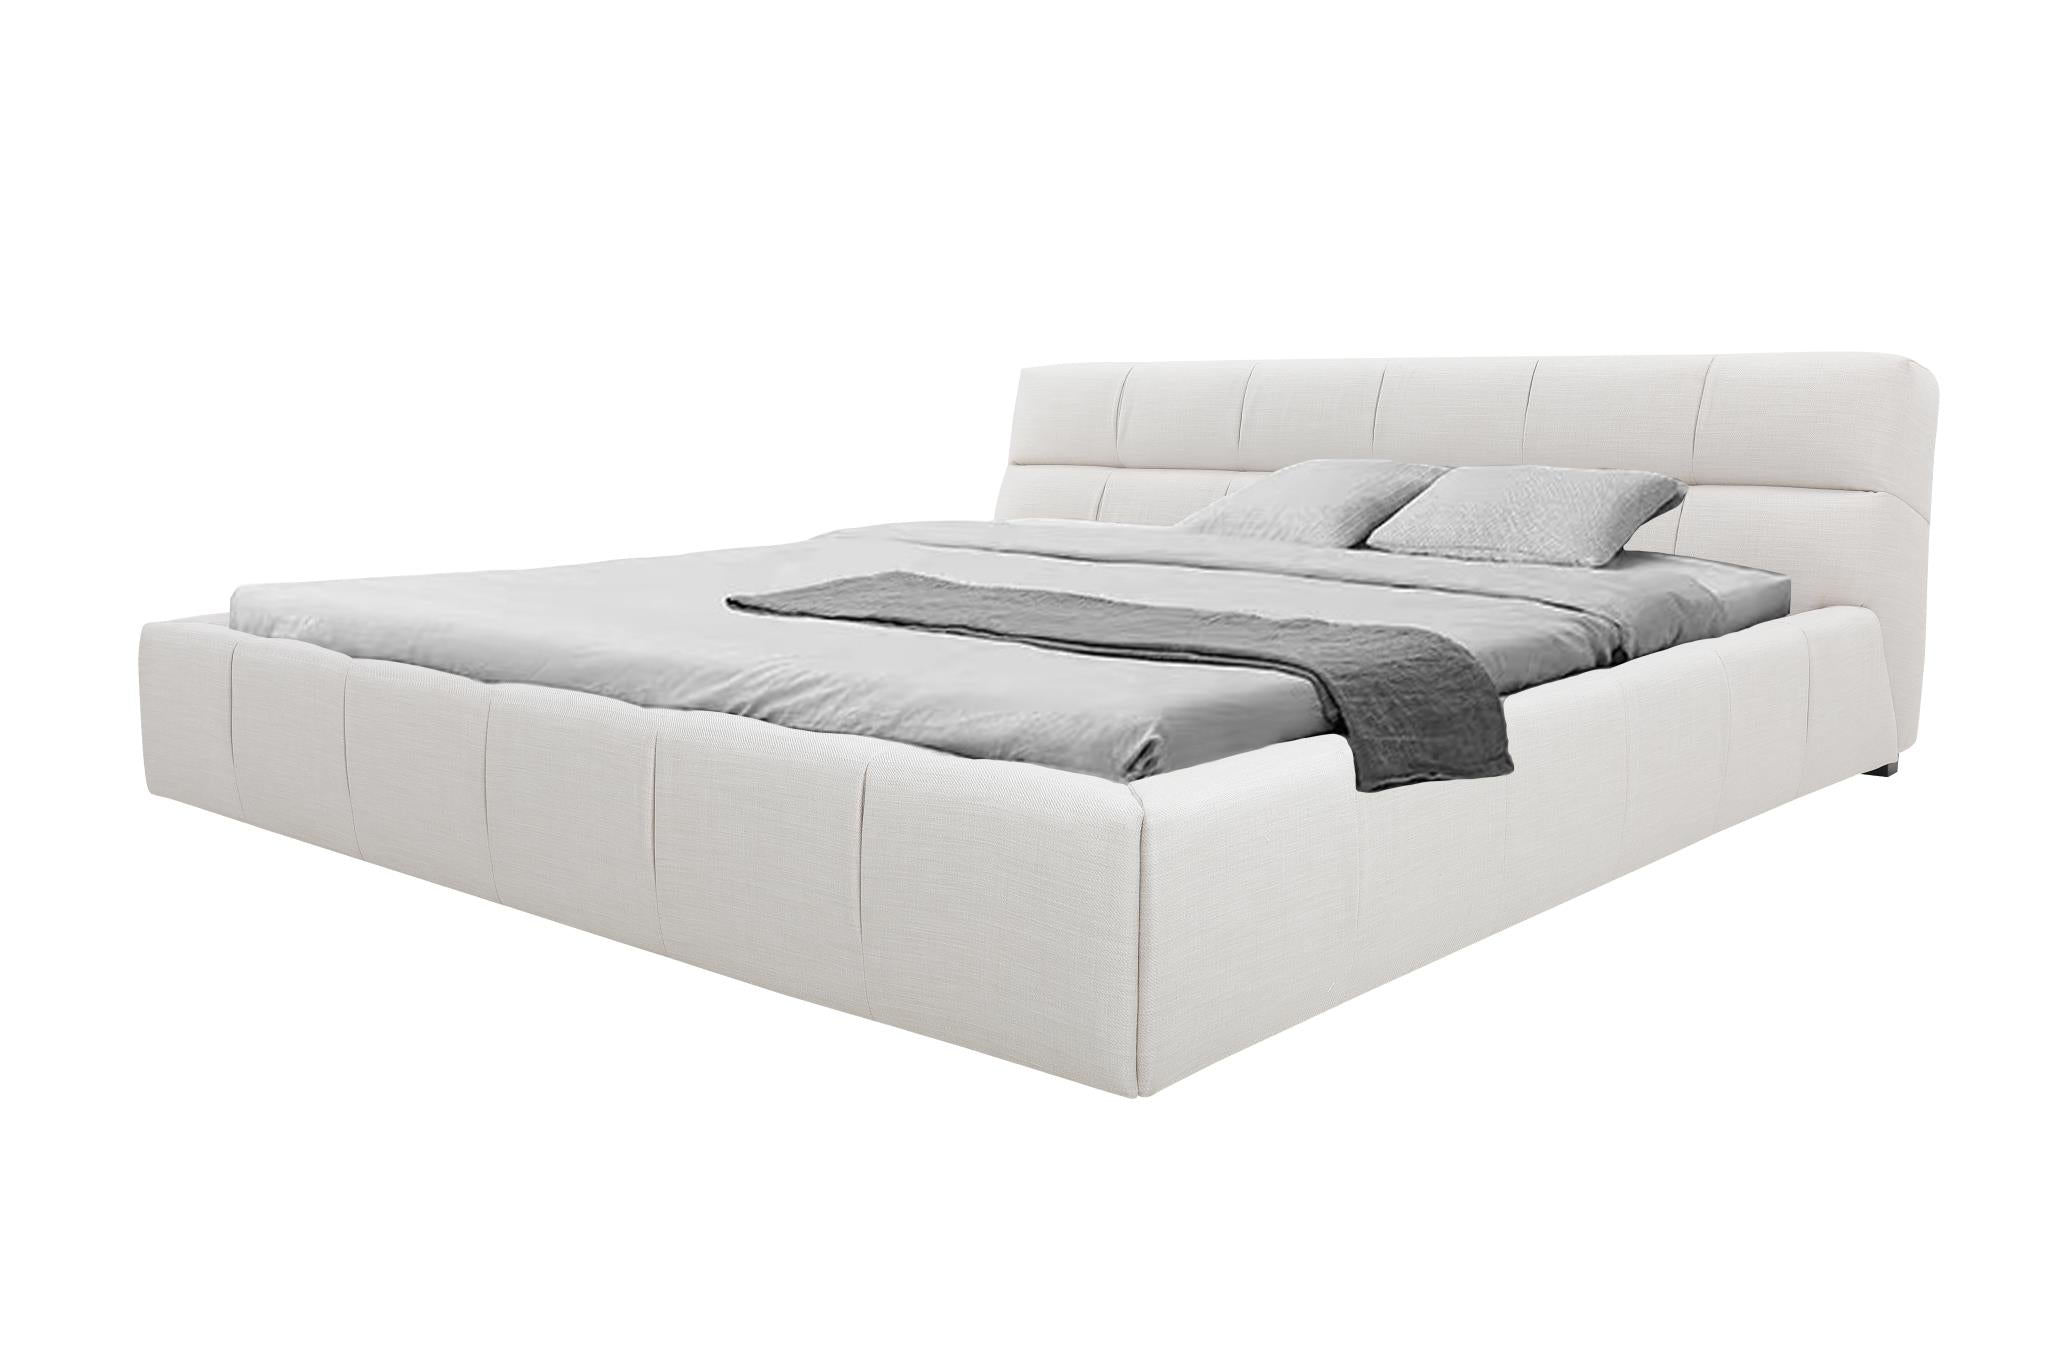 BUBBLE Upholstered Storage Bed in Almond Milk